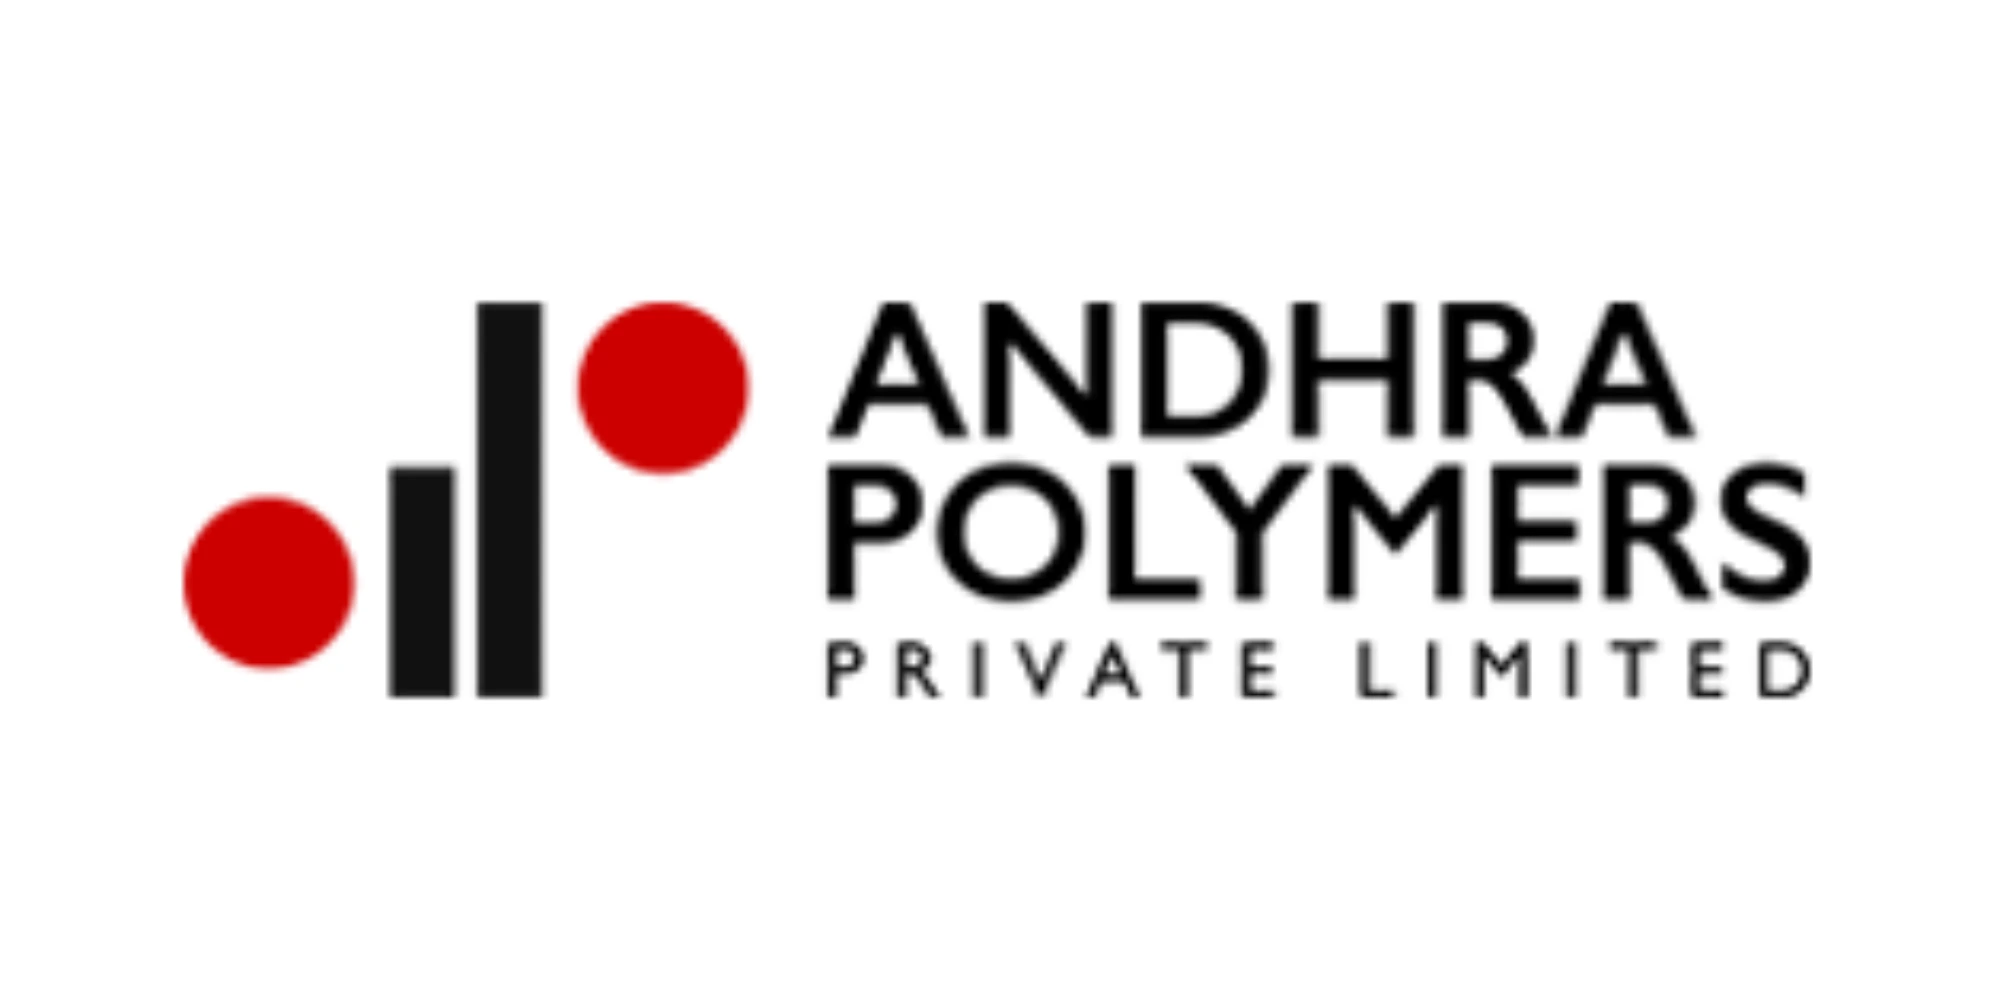 andhra polymers